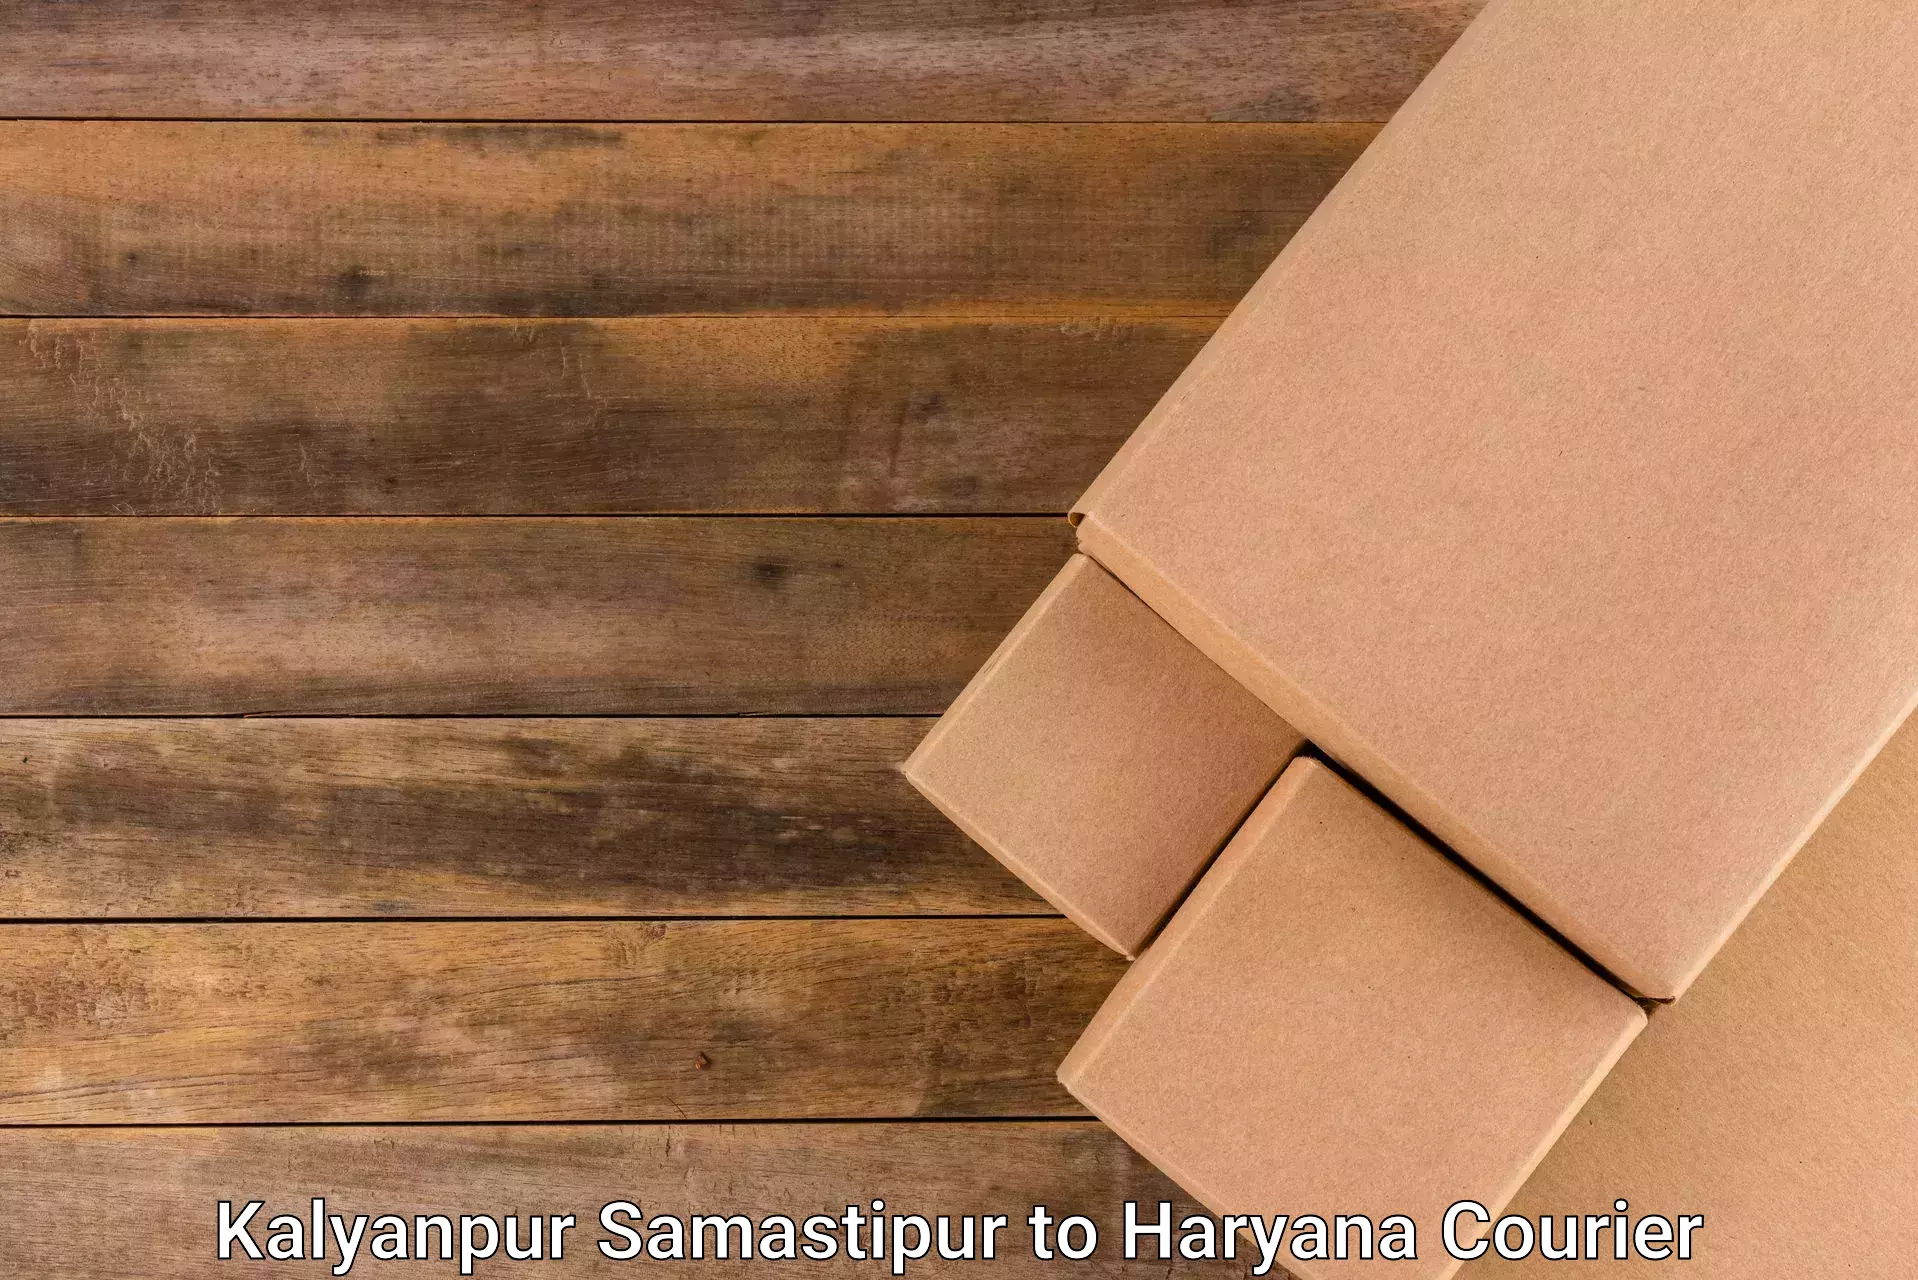 Rural area delivery in Kalyanpur Samastipur to Haryana